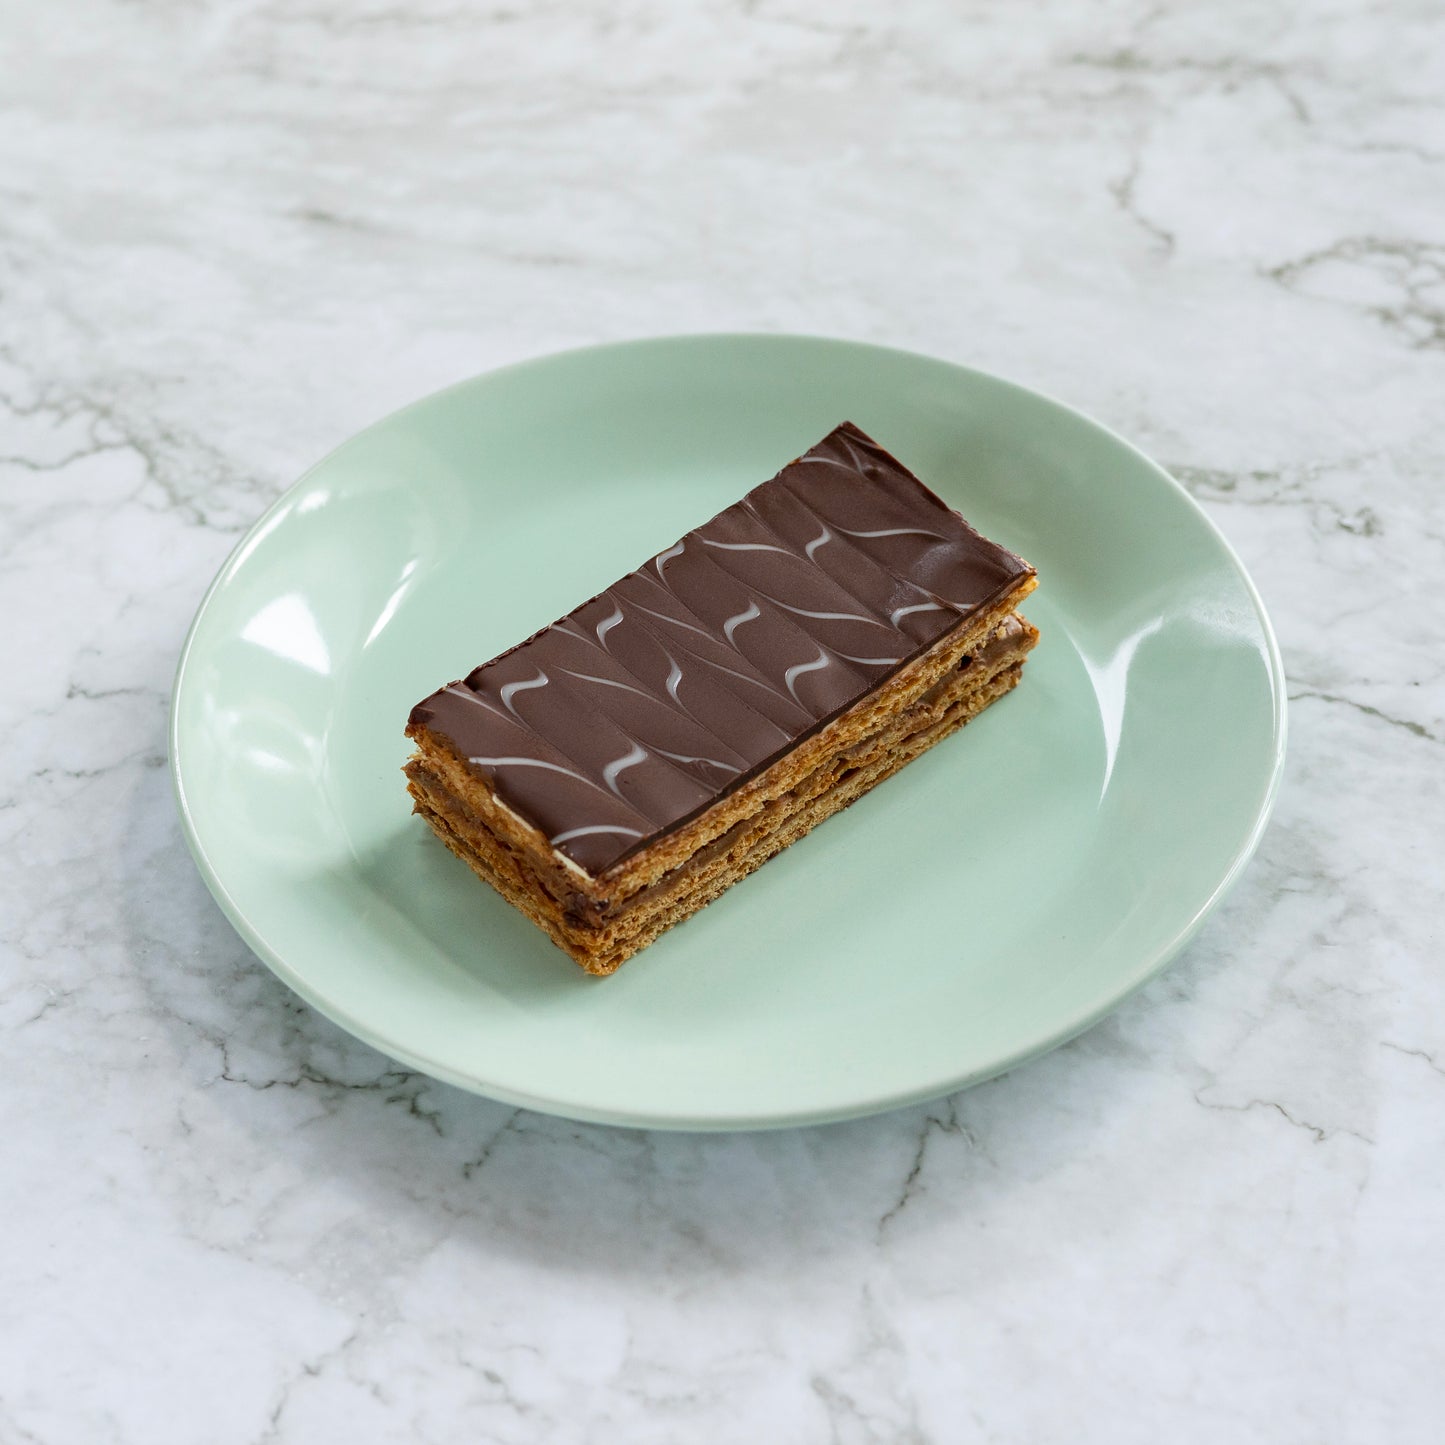 Mille-Feuille ميلفاي